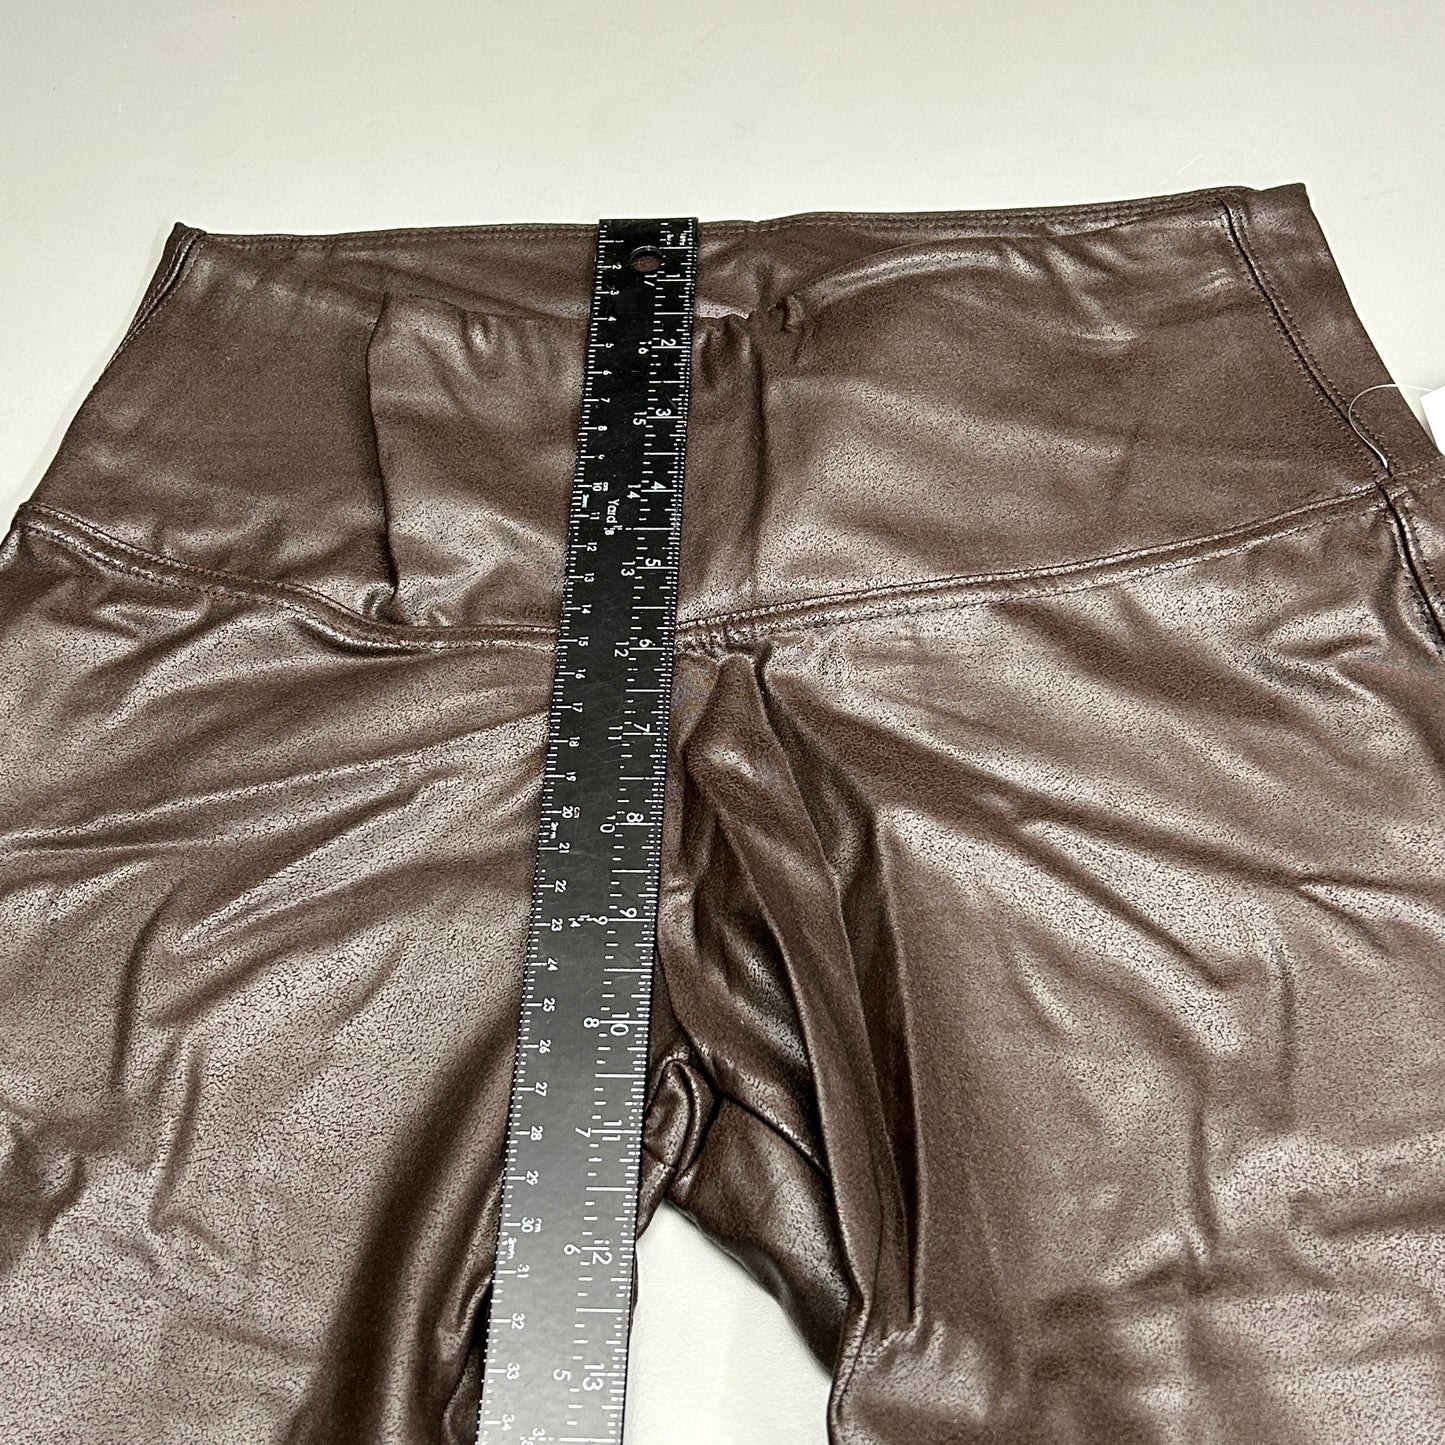 TIME AND TRU Women's Faux Leather Leggings Sz M 8-10 Brown (New)